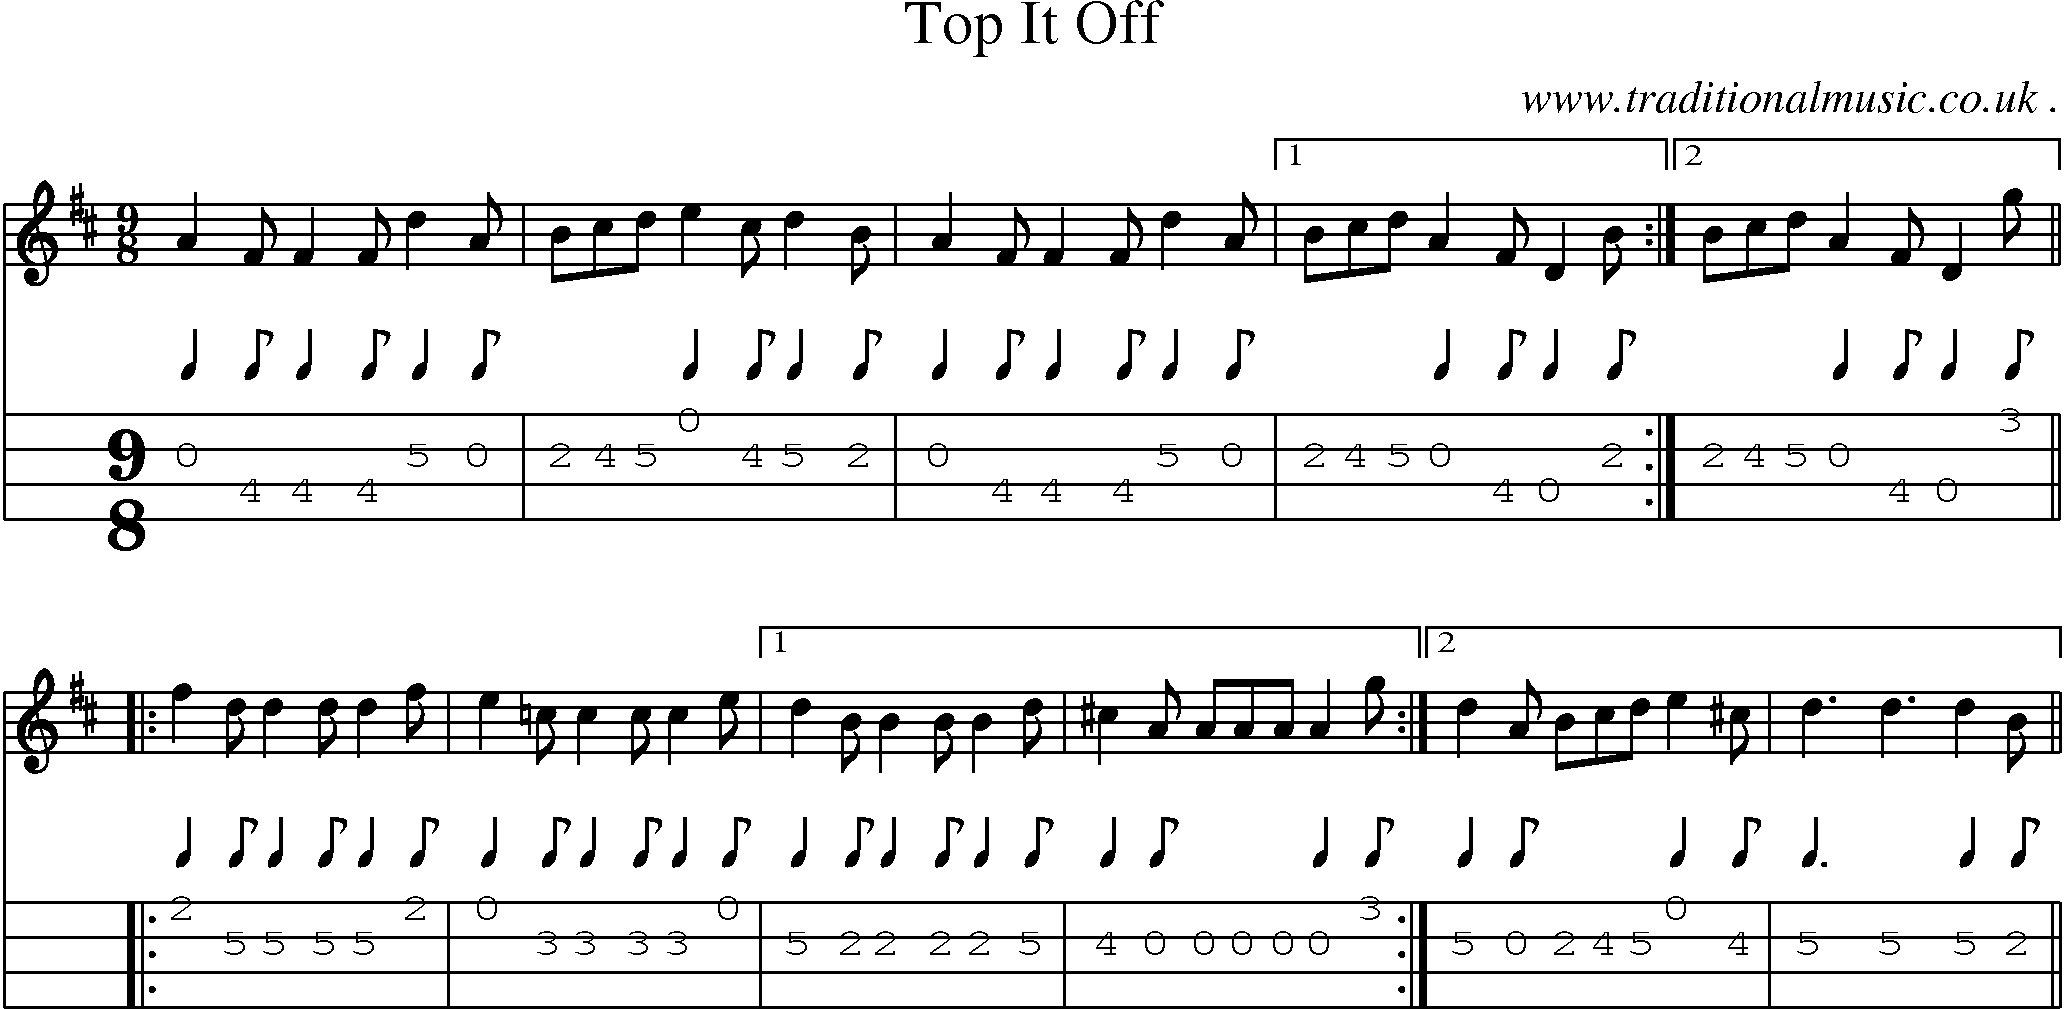 Sheet-Music and Mandolin Tabs for Top It Off